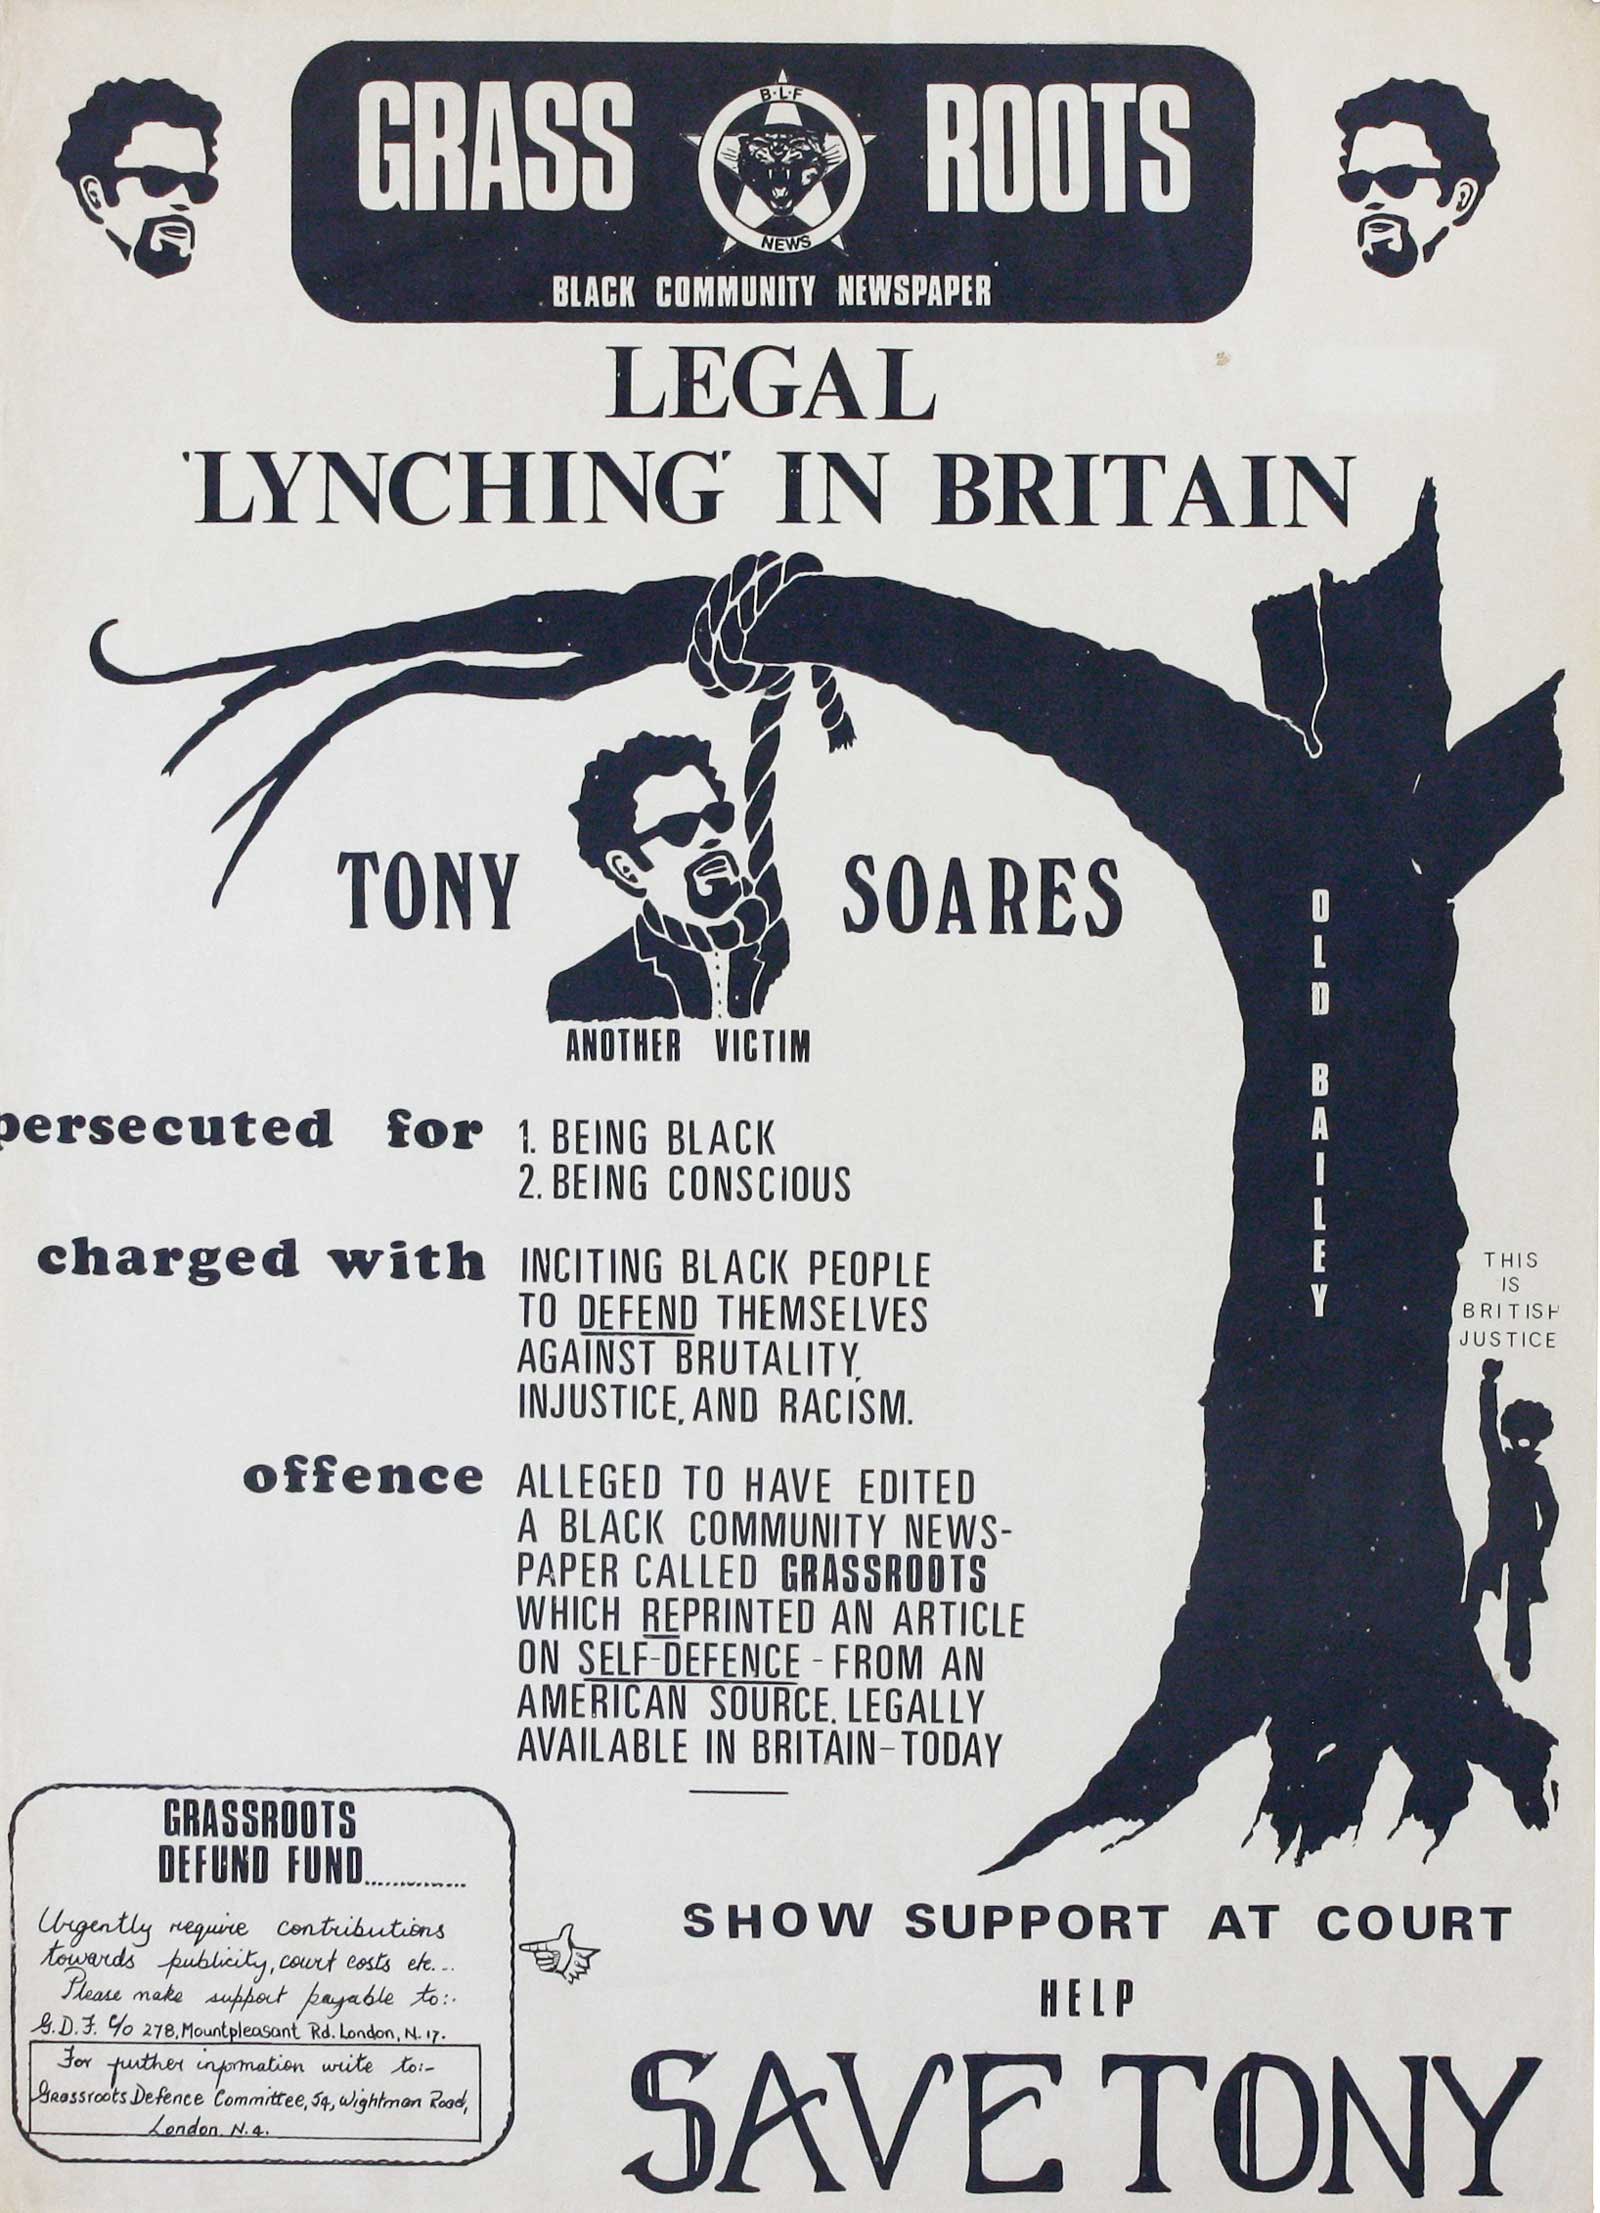 Broadside in support of Tony Soares, 1972. Soares, a founding member of the Black Liberation Front and editor of its publication Grass Roots, was arrested on 9 March 1972 after reprinting an article from the US Black Panthers newspaper that included instructions for making Molotov cocktails. He was found guilty on 21 March 1973 and sentenced to community service.